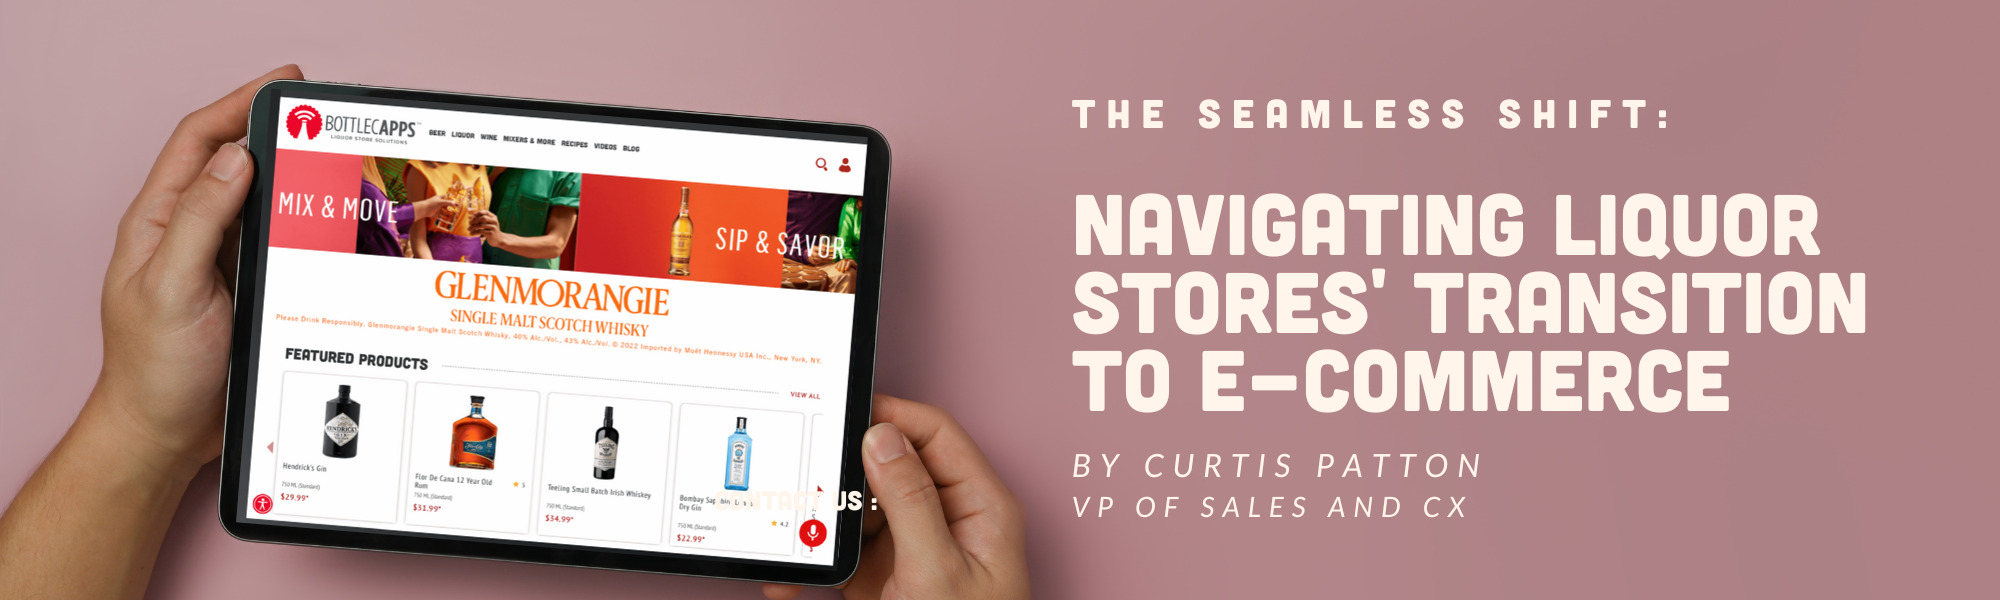 The Seamless Shift: Navigating Liquor Stores’ Transition to E-Commerce